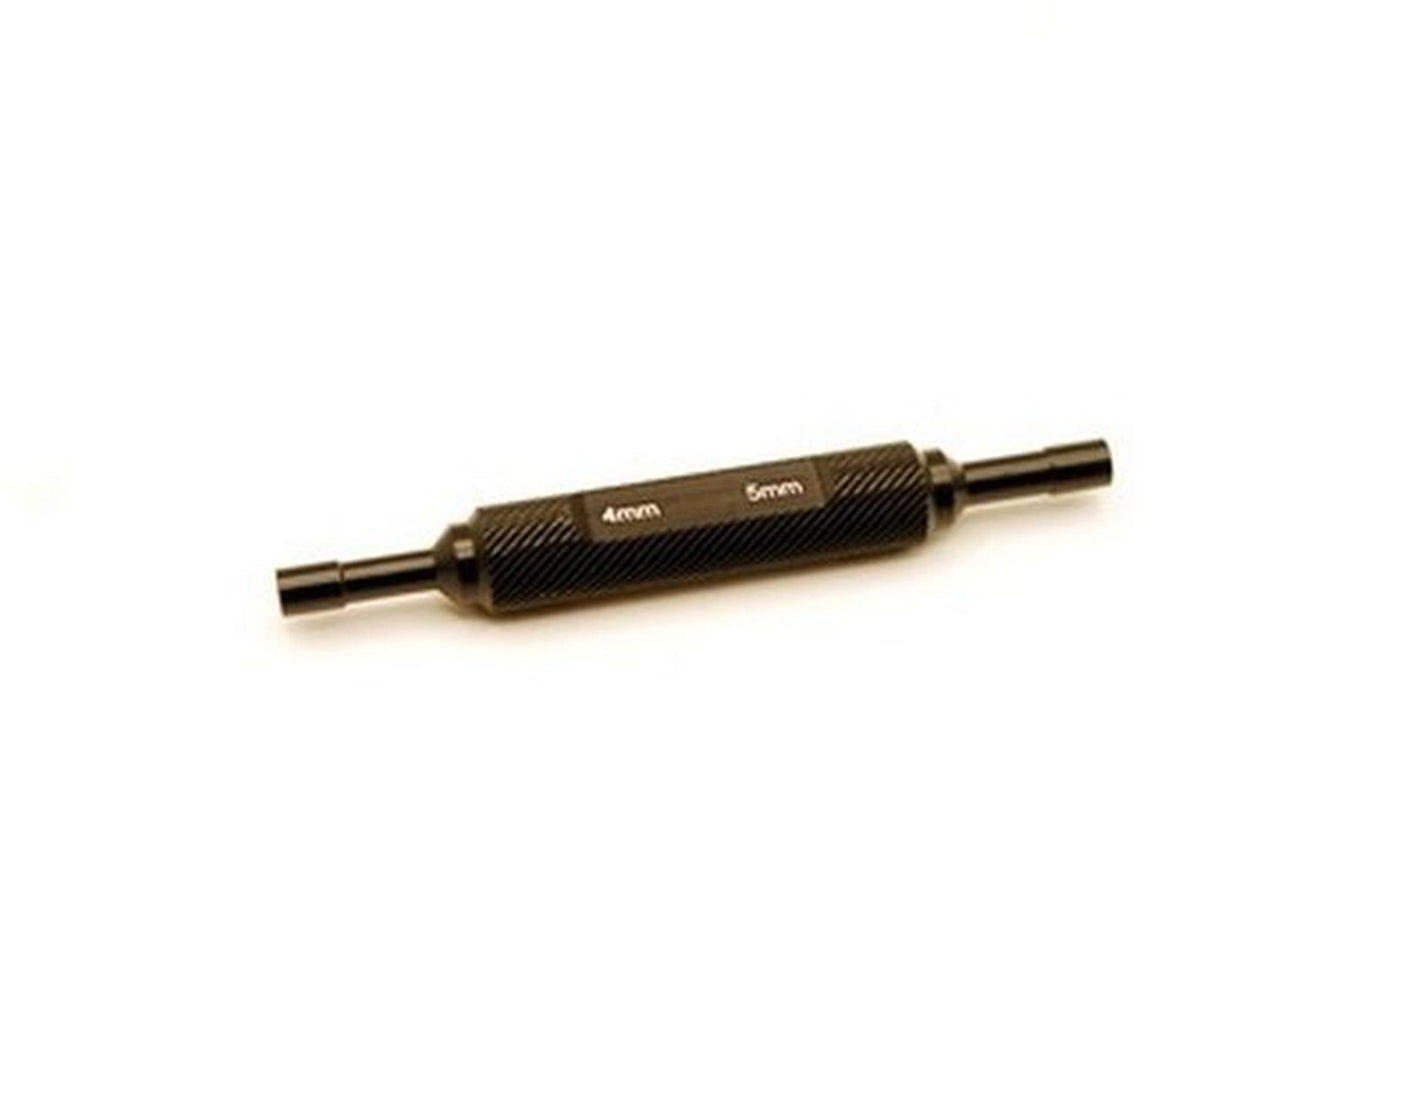 Aluminum 4mm/5mm Thin-Walled Wheel Nut Wrench, Black, for Mini Crawlers SCX/AX24 or TRX-4M